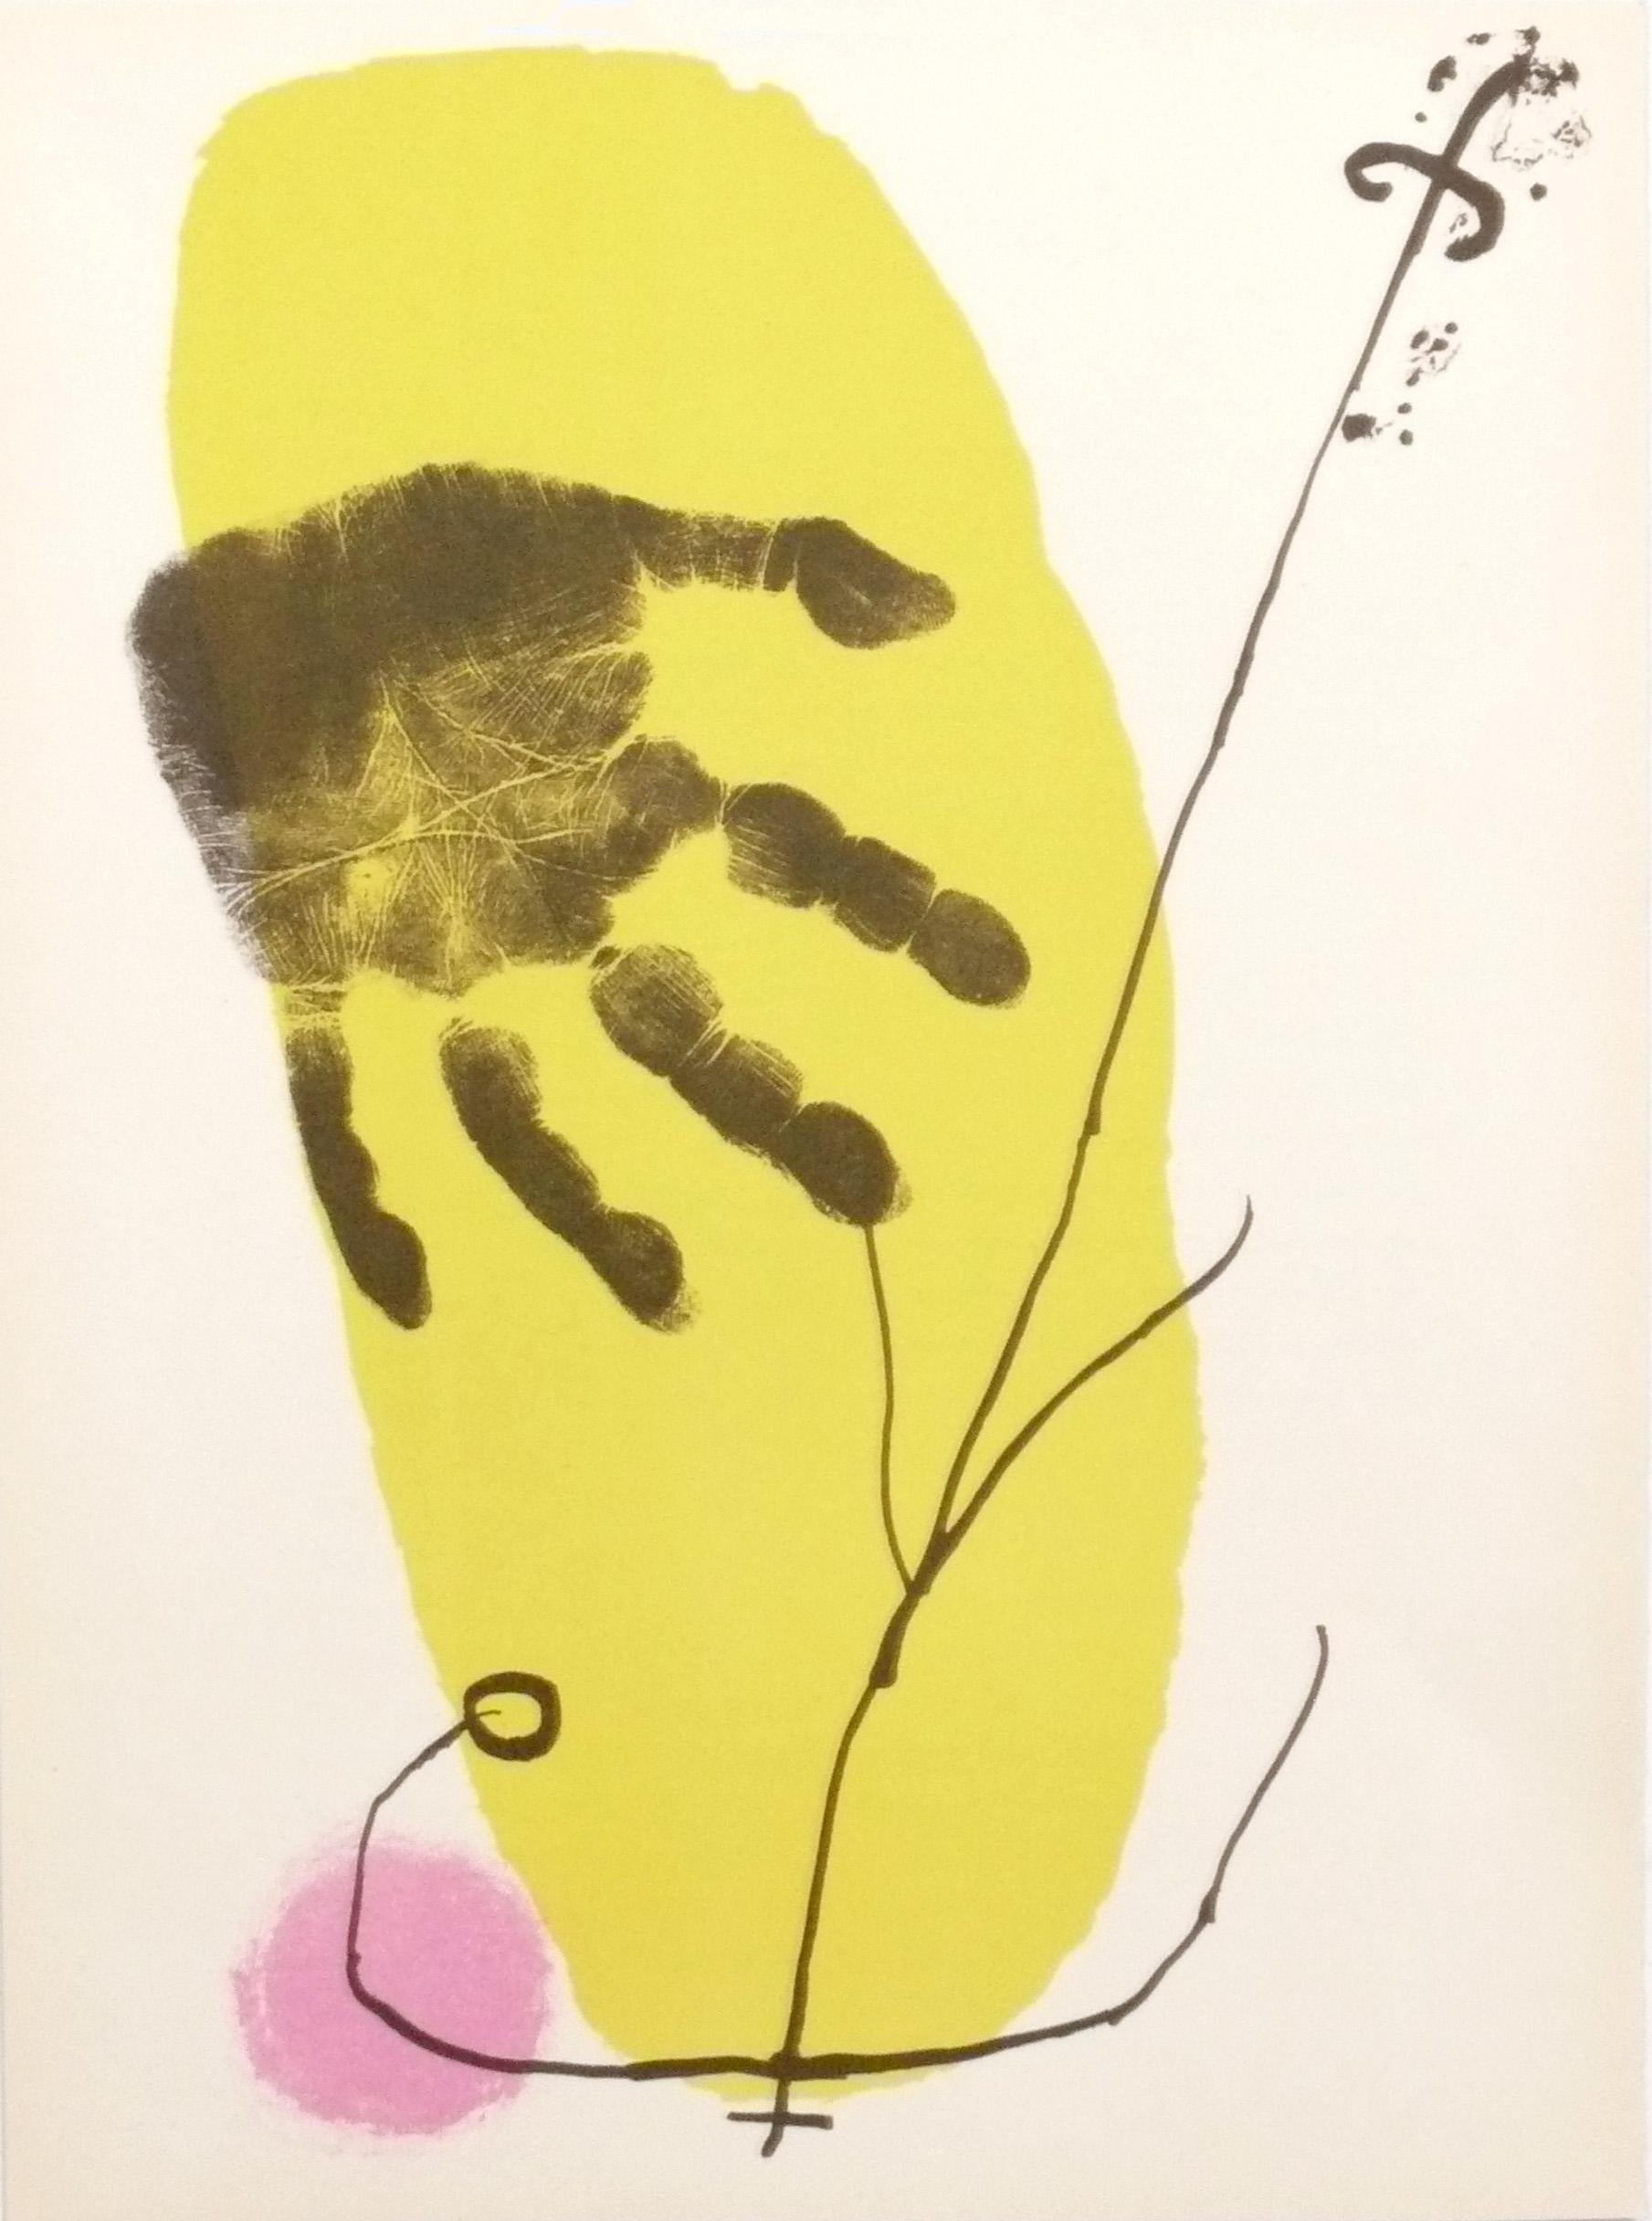 Selection of Joan Miro color lithographs, French, circa 1960s. They are from the limited edition folio “Derriere le Miroir”, published by the legendary Galerie Maeght, circa 1960s. Please see our other 1stdibs listings for more Joan Miro works from